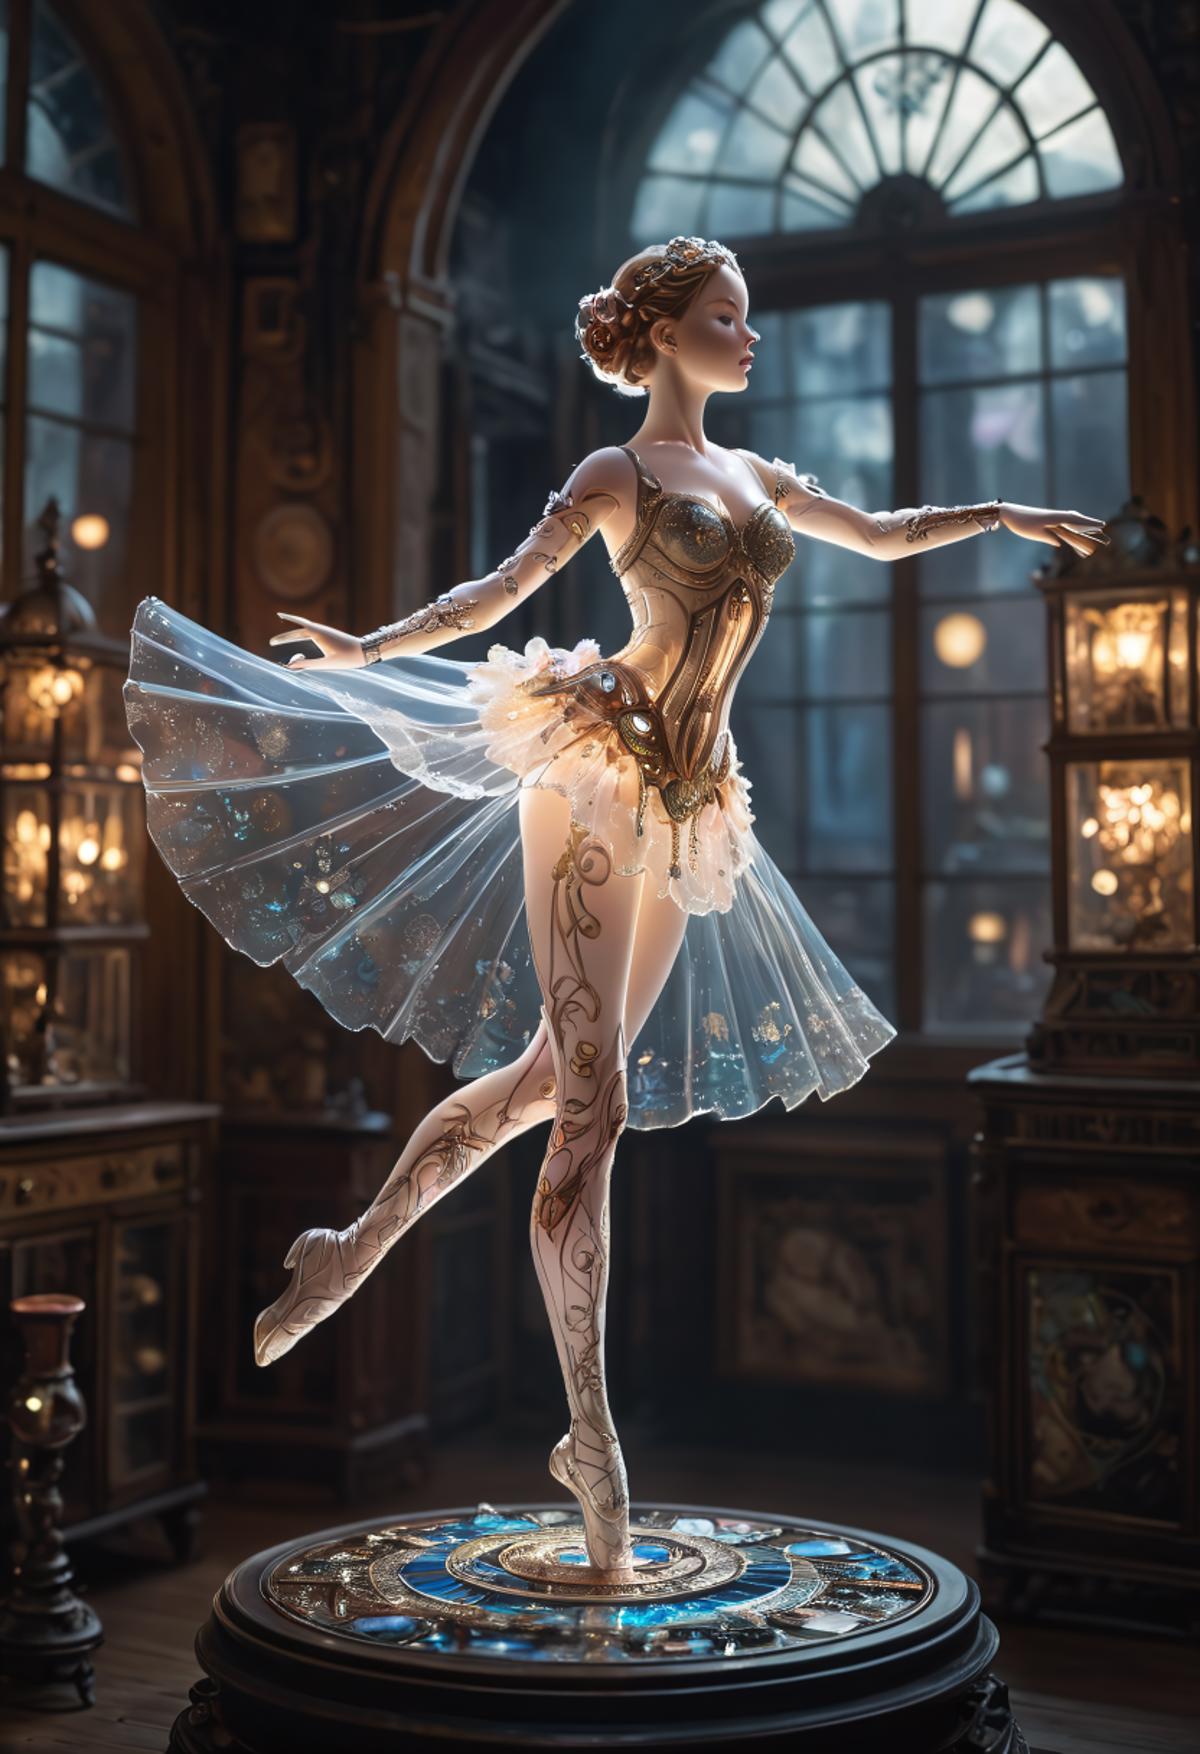 A Fairy Tale Beauty Ball Dancing in a Glass Display Case